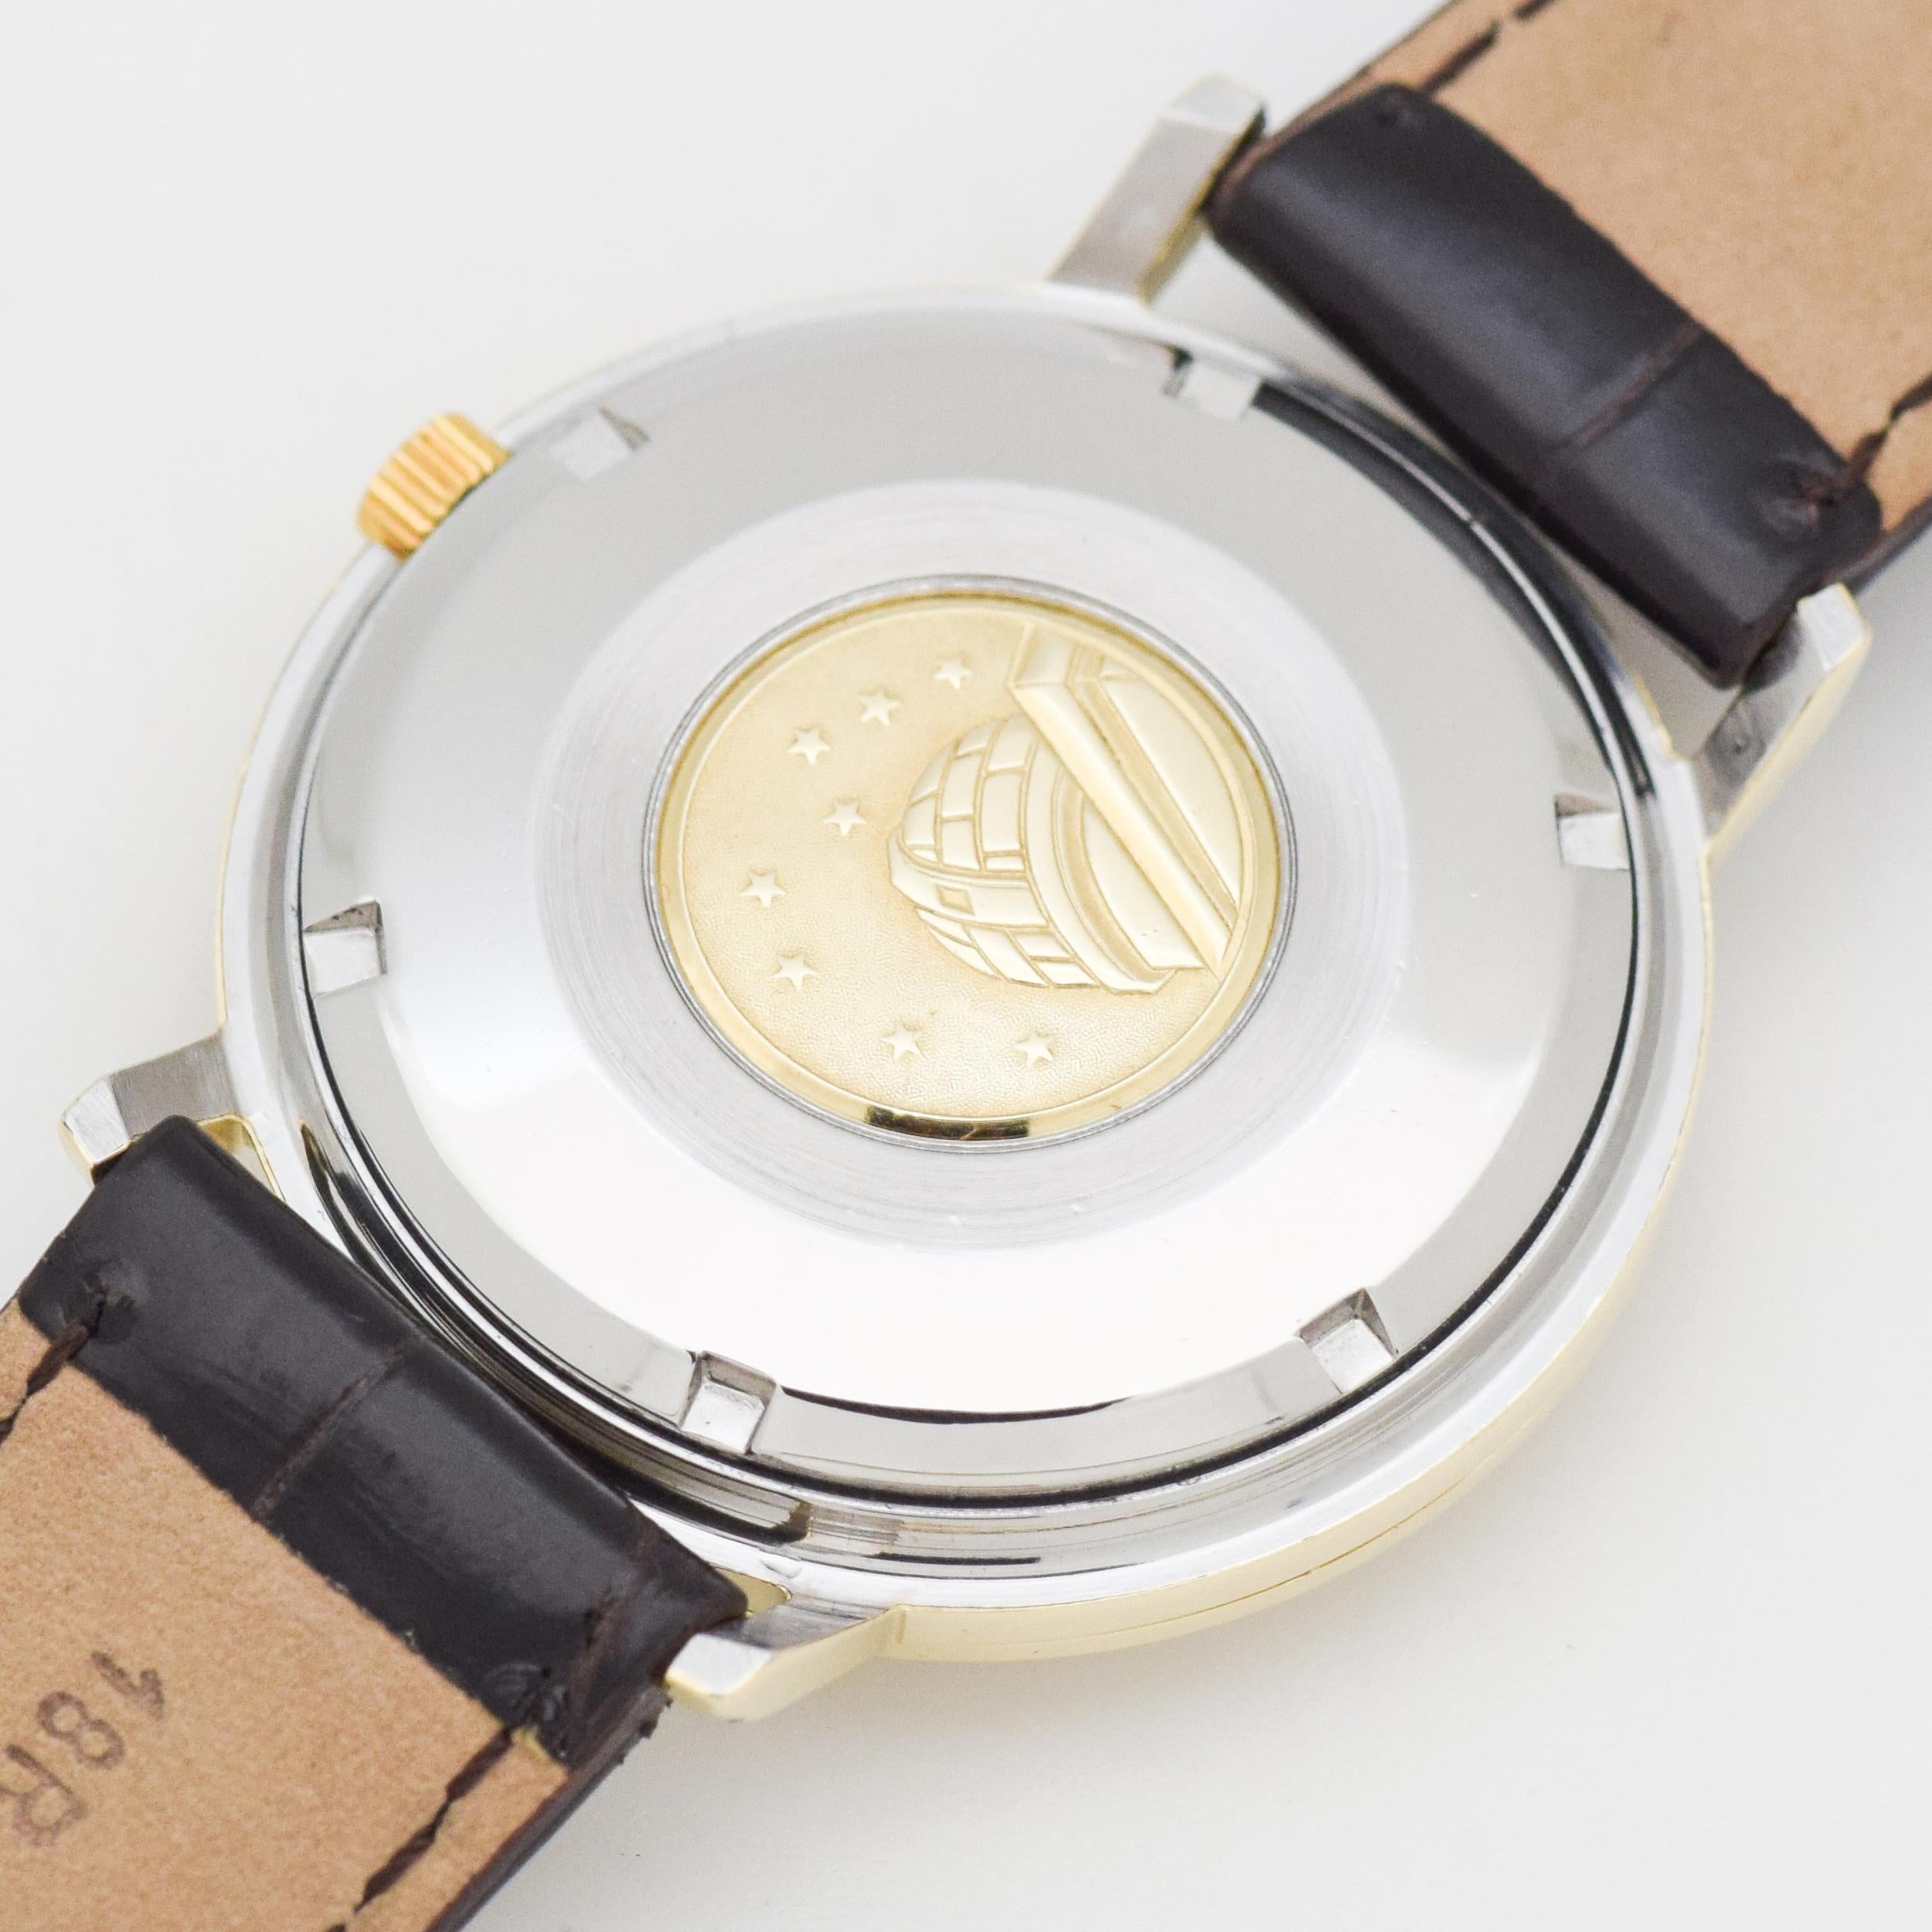 35mm omega constellation pie pan in 14k yellow gold